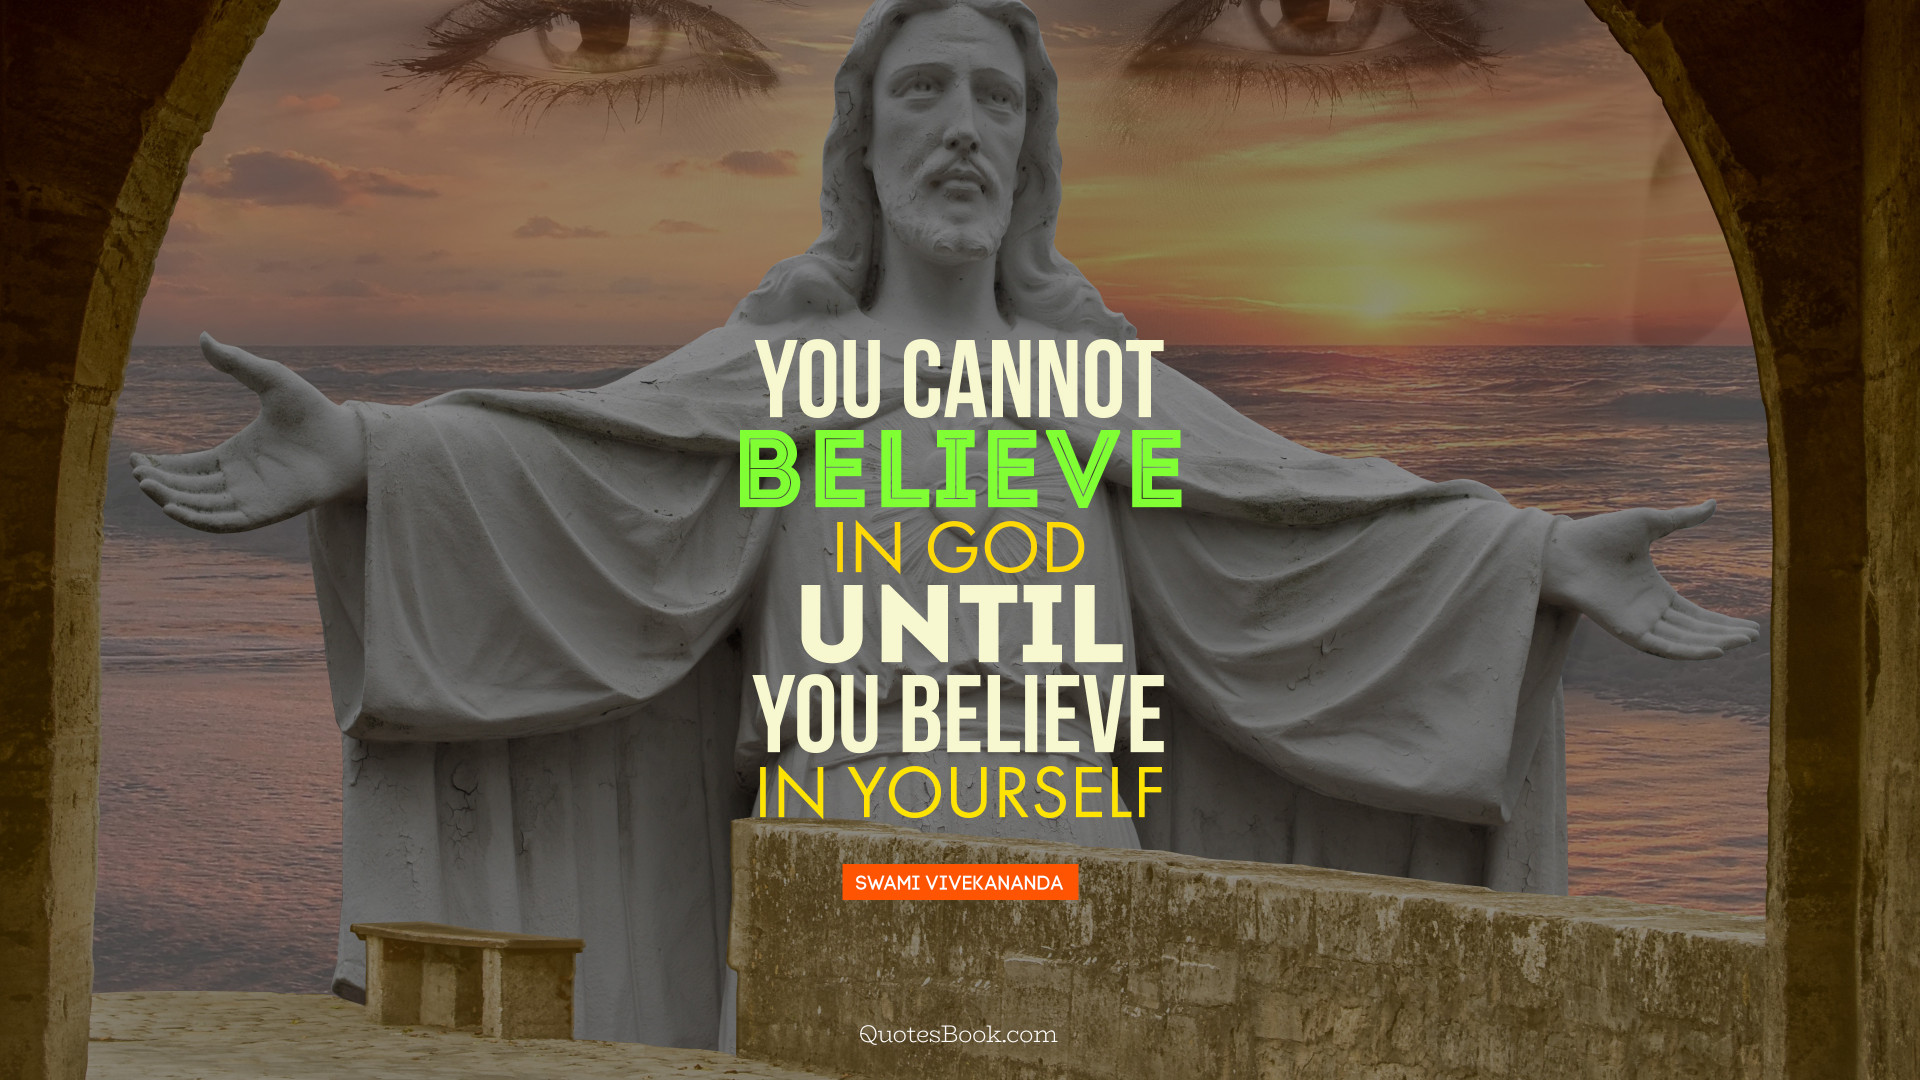 You cannot believe in God until you believe in yourself. - Quote by